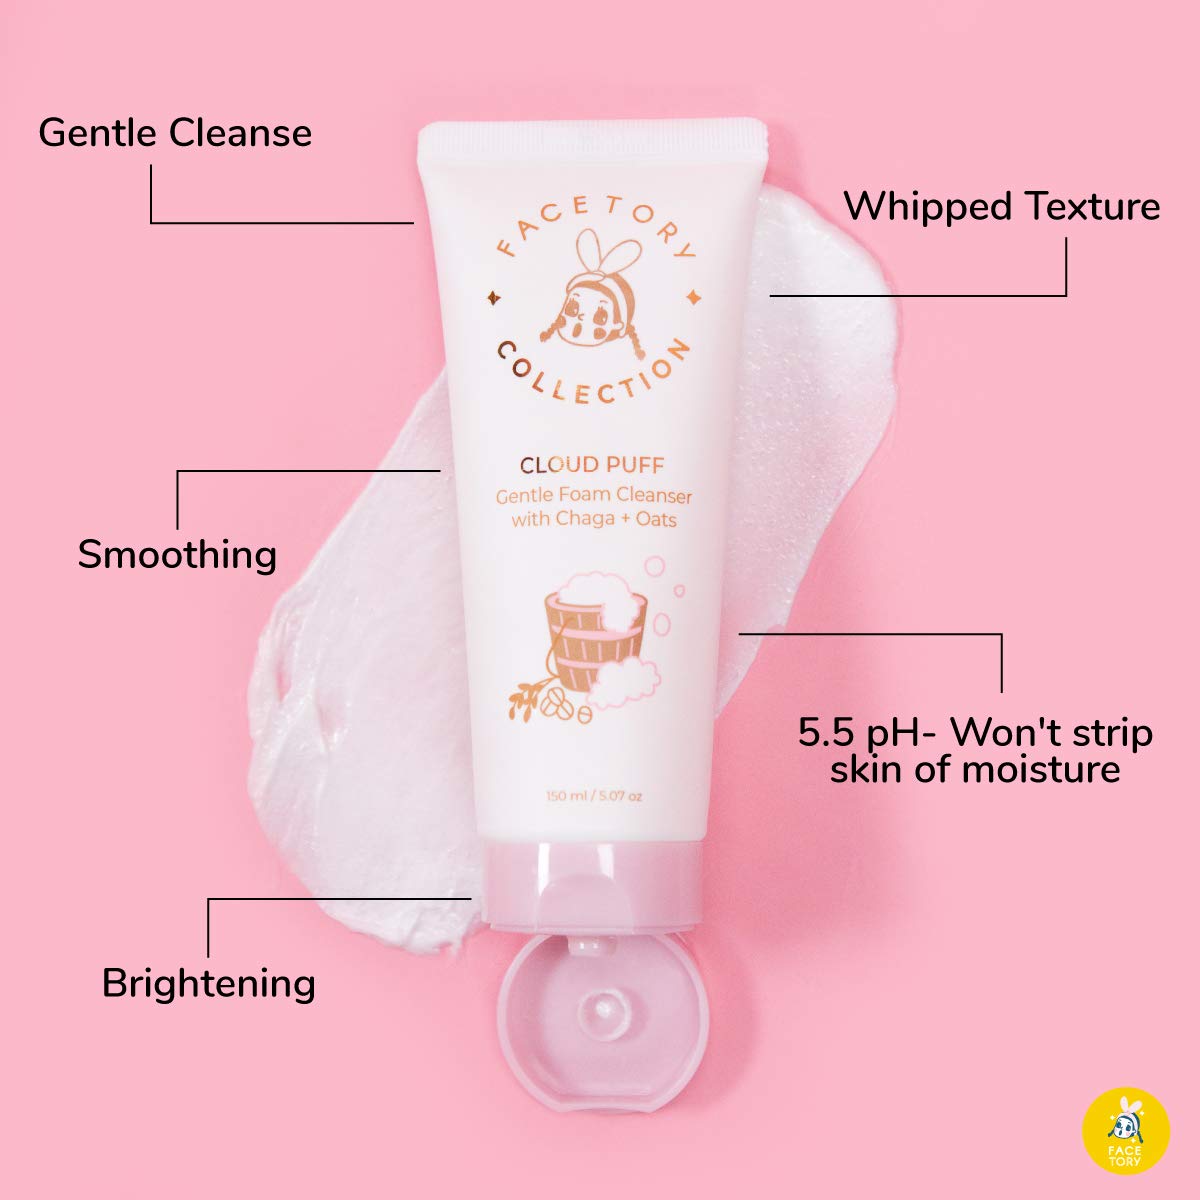 FACETORY Oat Skin Care Bundle made with Oats Extract - Contains 5 Oats My Bananas Sheet Masks, 1 Cloud Puff Cleanser, and 1 Calming Glow Facial Oil - Moisturizing, Nourishing, Smoothing